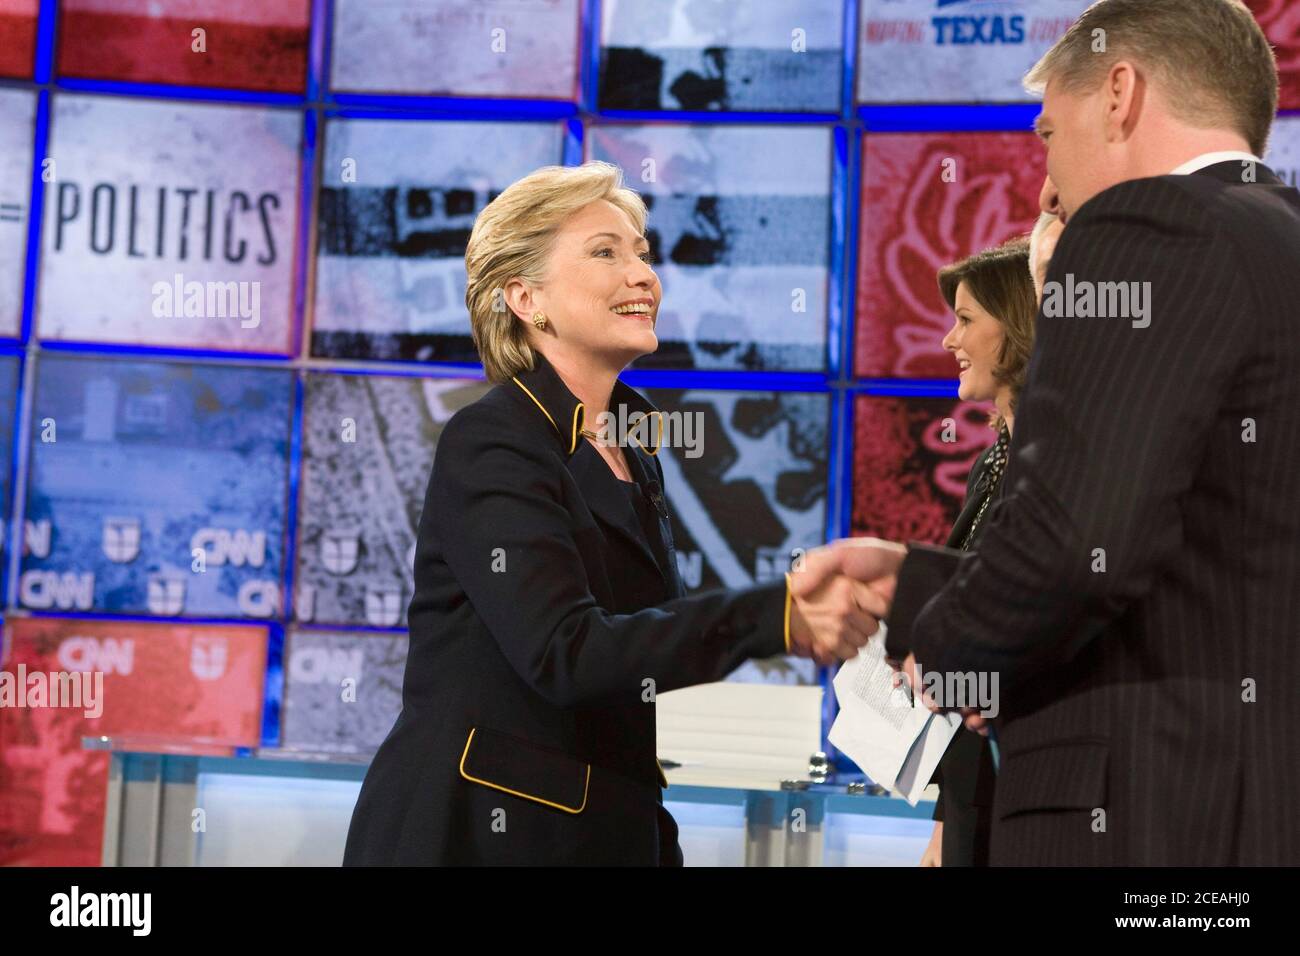 Austin, Texas February 21, 2008: Senator Hillary Clinton (l) shakes hands with CNN anchor John King on the stage at the University of Texas prior to her debate with Sen. Barack Obama as they vie for the for the Democratic nomination for President of the United States. ©Bob Daemmrich Stock Photo